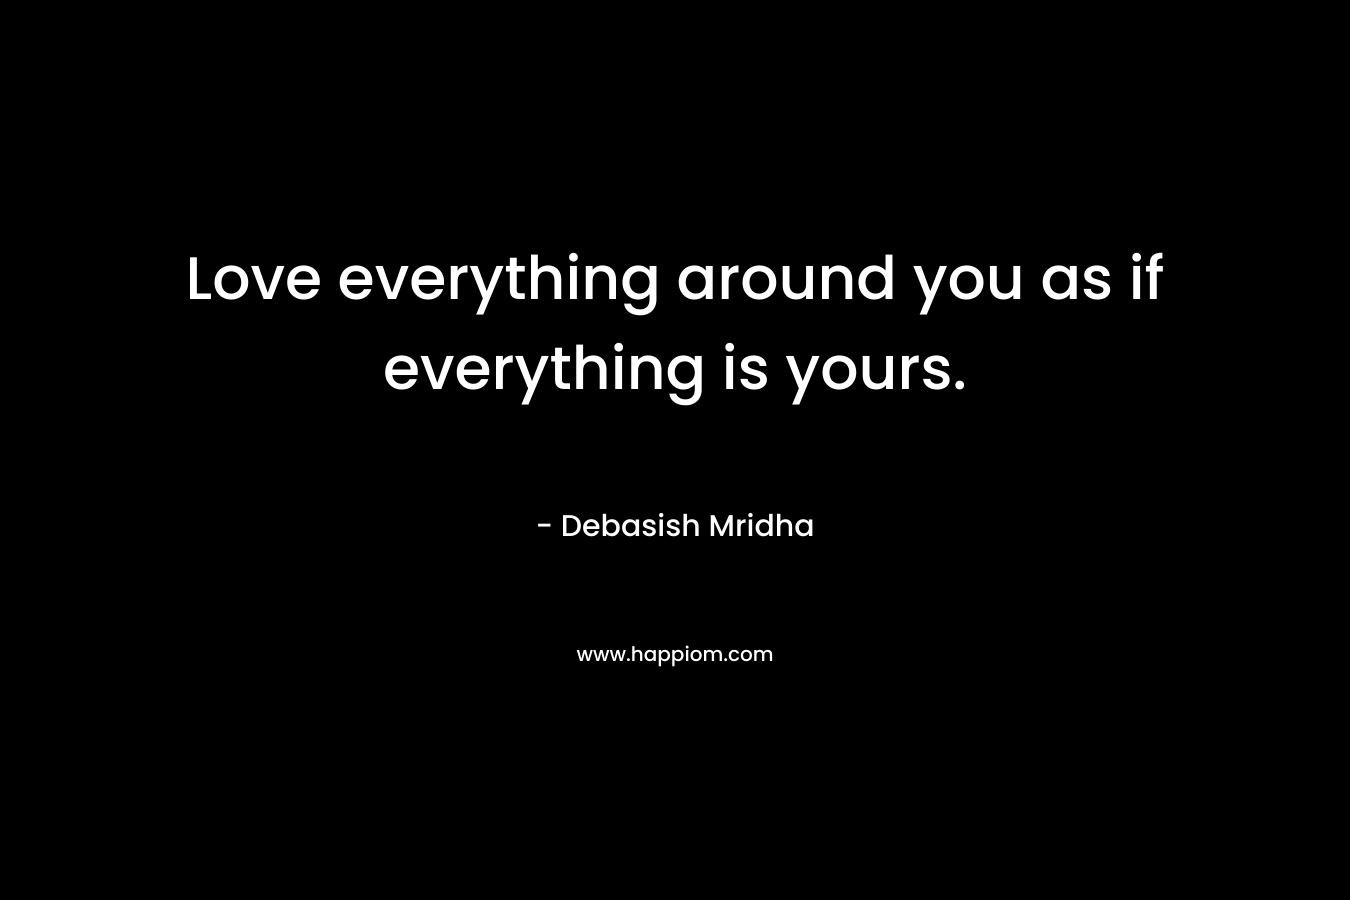 Love everything around you as if everything is yours.